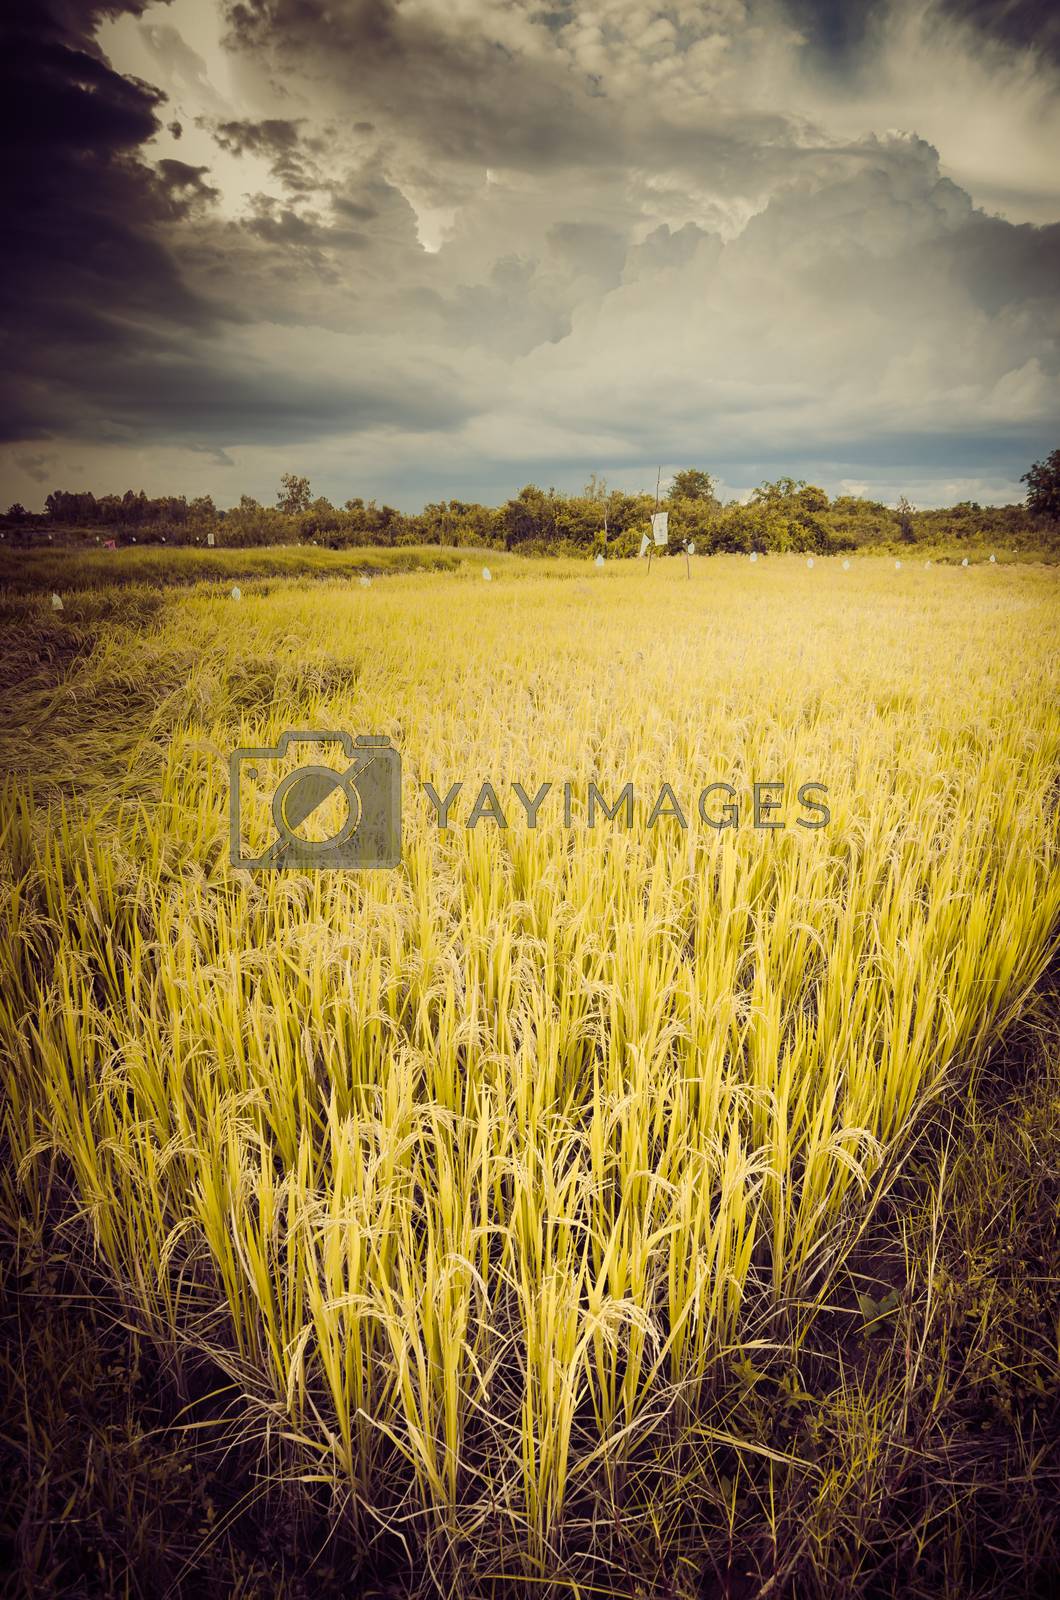 Royalty free image of Rice field by sweetcrisis